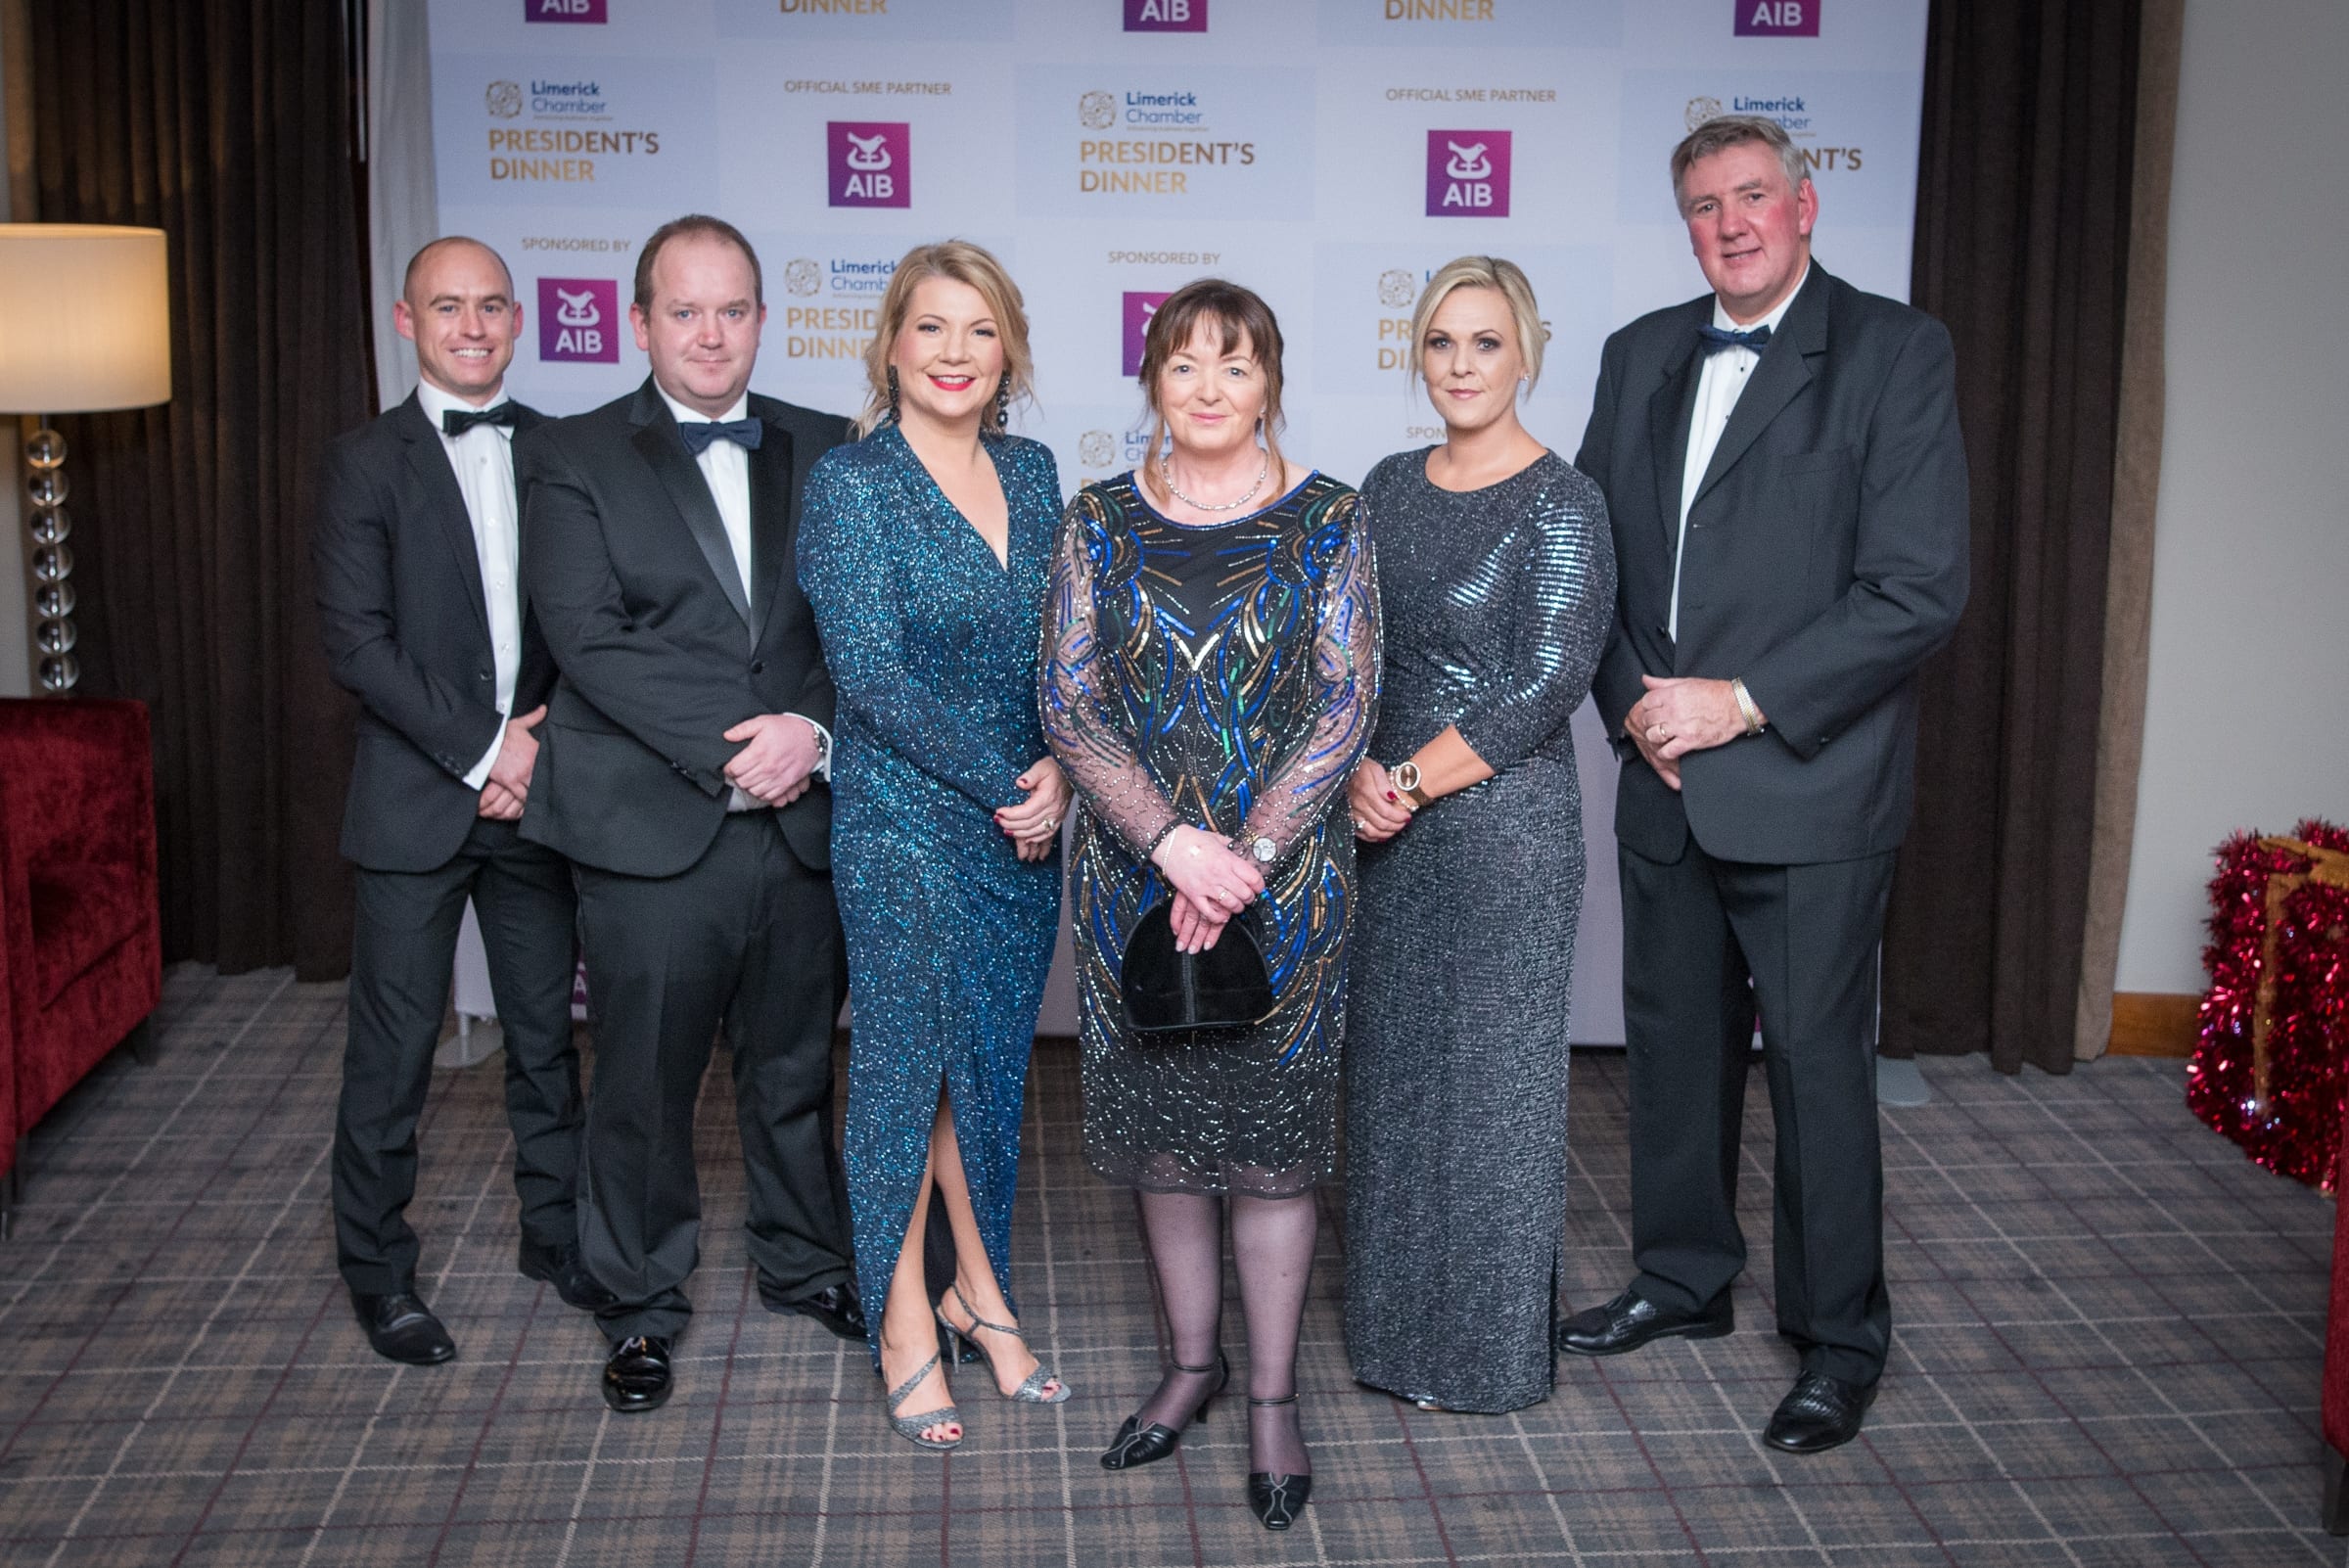 No repro fee- limerick chamber president's dinner- 16-11-2018, From Left to Right: 
Shane McCarthy - AIB / Sponsor,Conor O'Sullivan - AIB / Sponsor,  Joanne McTaggart - First Names, Joan O Dell - AIB / Sponsor, Caroline O Sullivan - First Names, Dermot Graham - AIB/ Sponsor.
Photo credit Shauna Kennedy